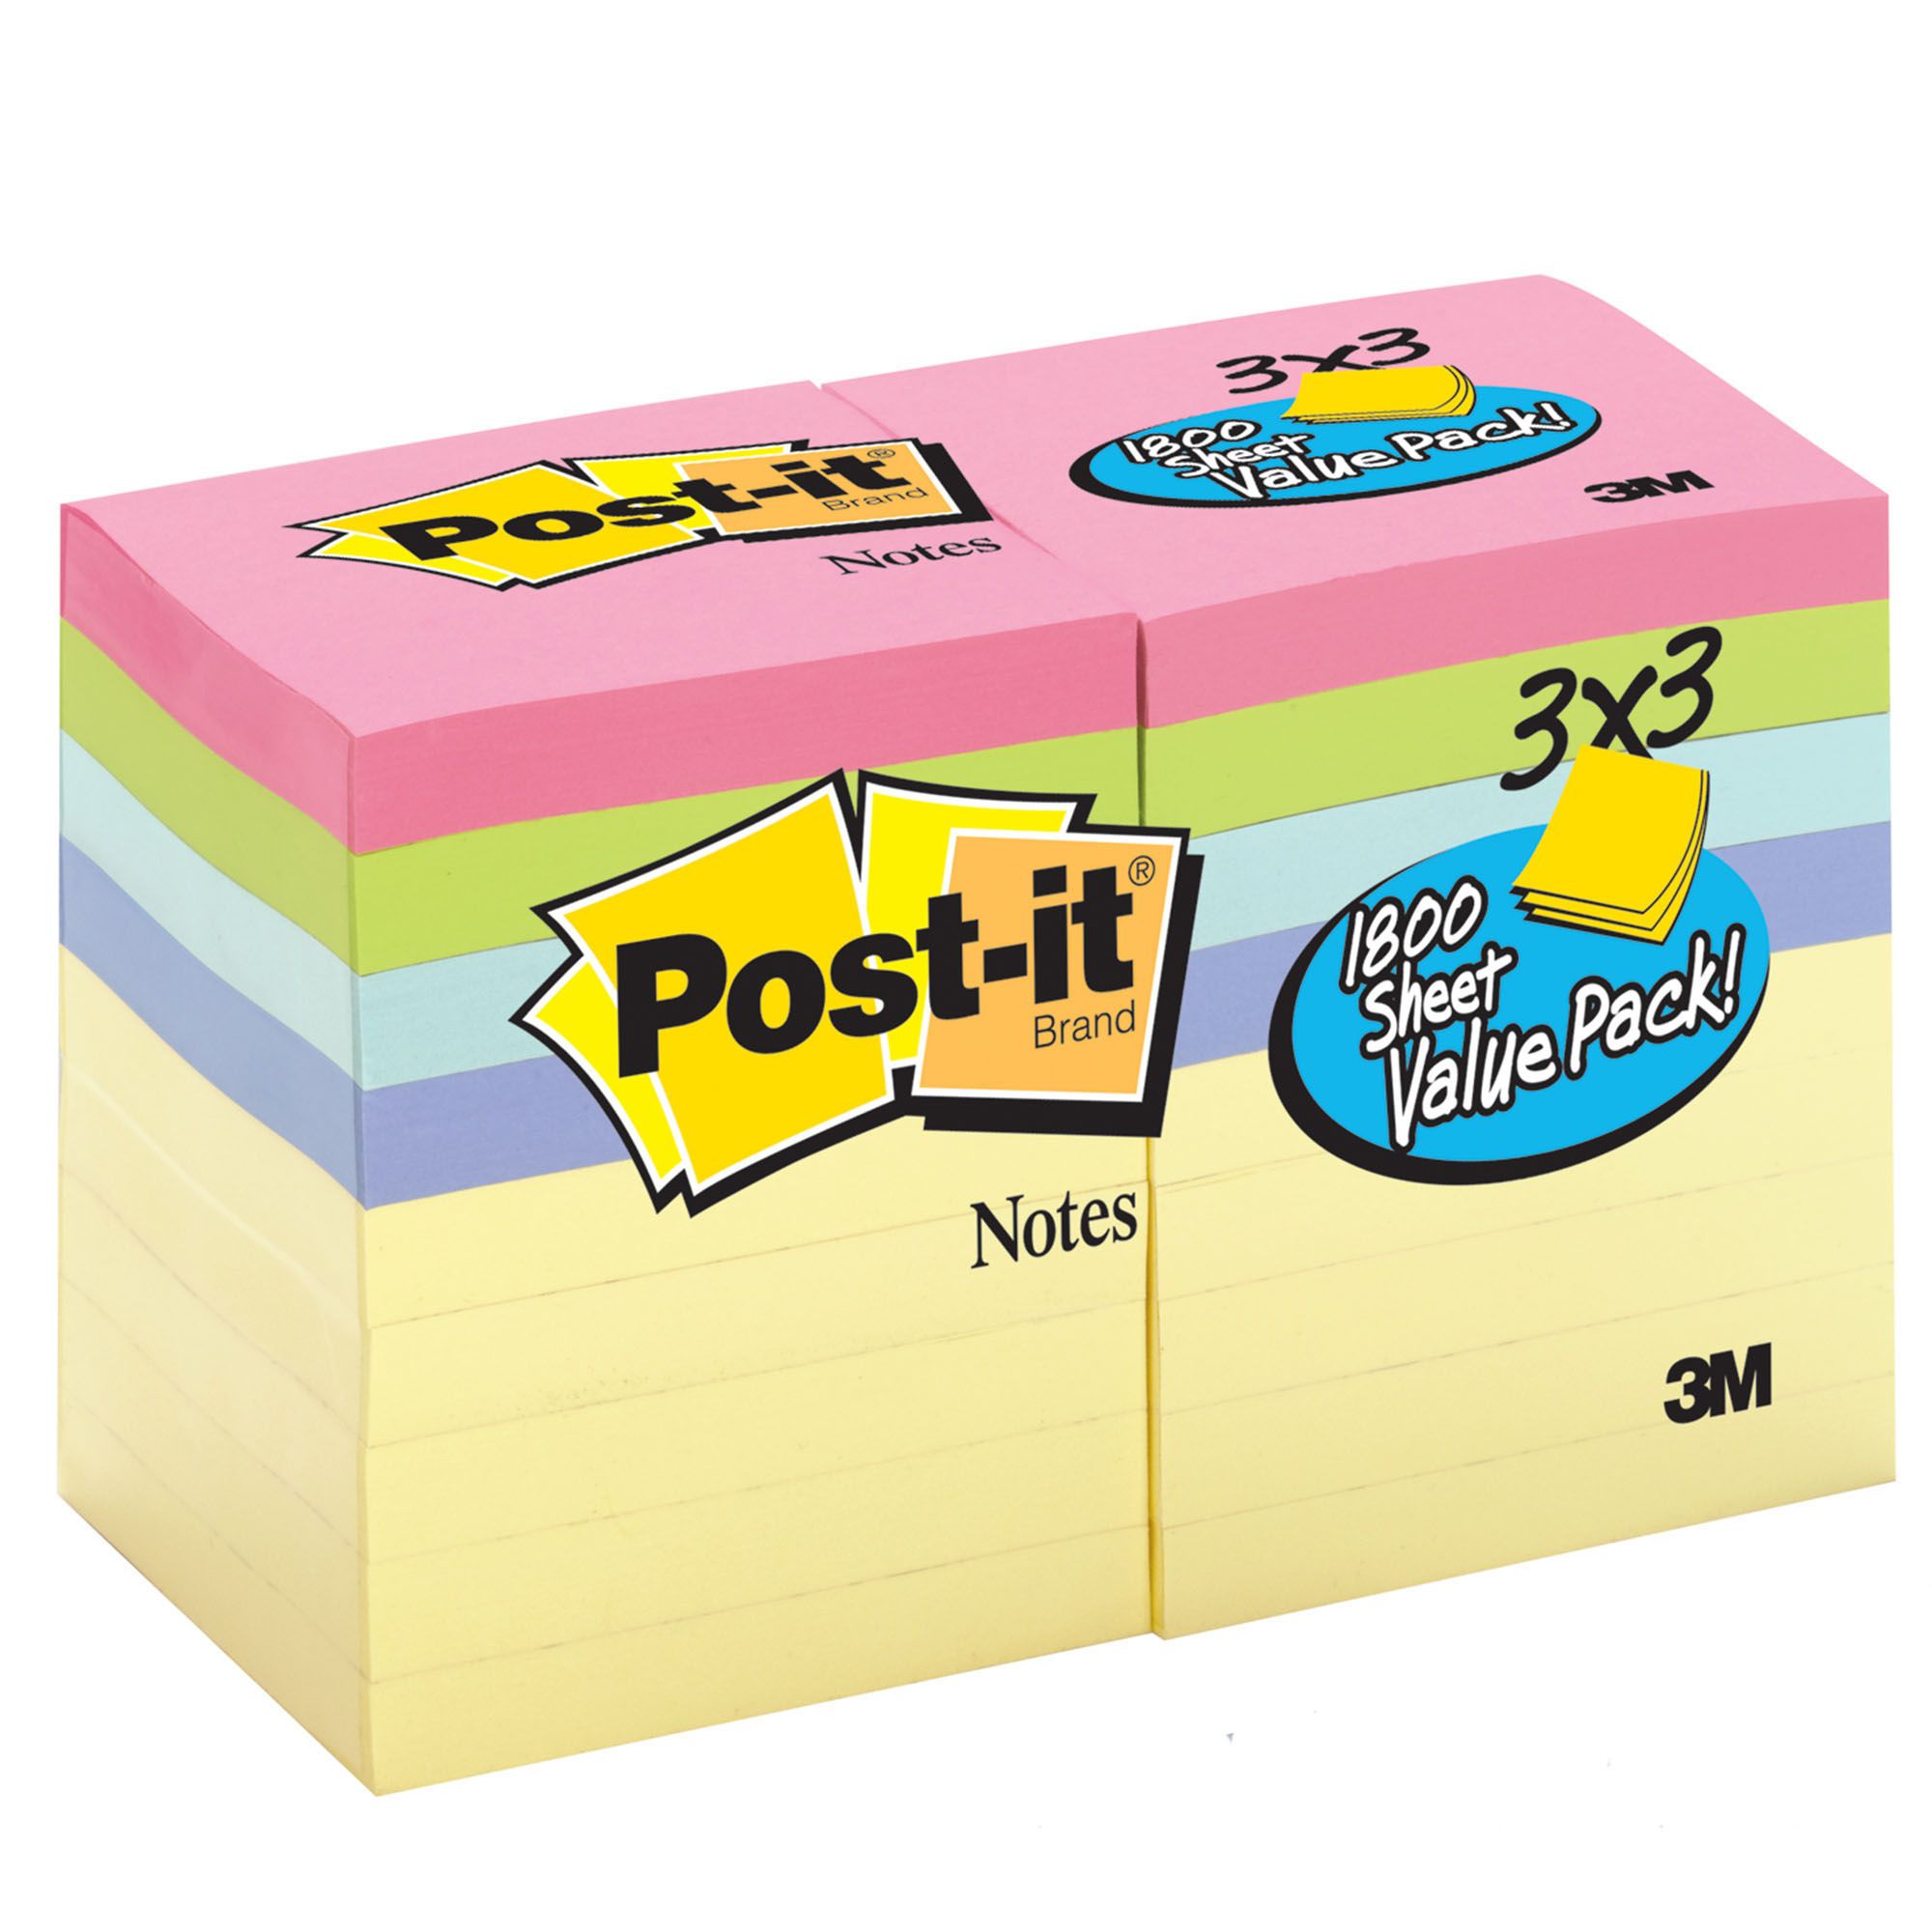 Post it Super Sticky Notes 100 Total Notes Pack Of 2 Pads 4 x 6